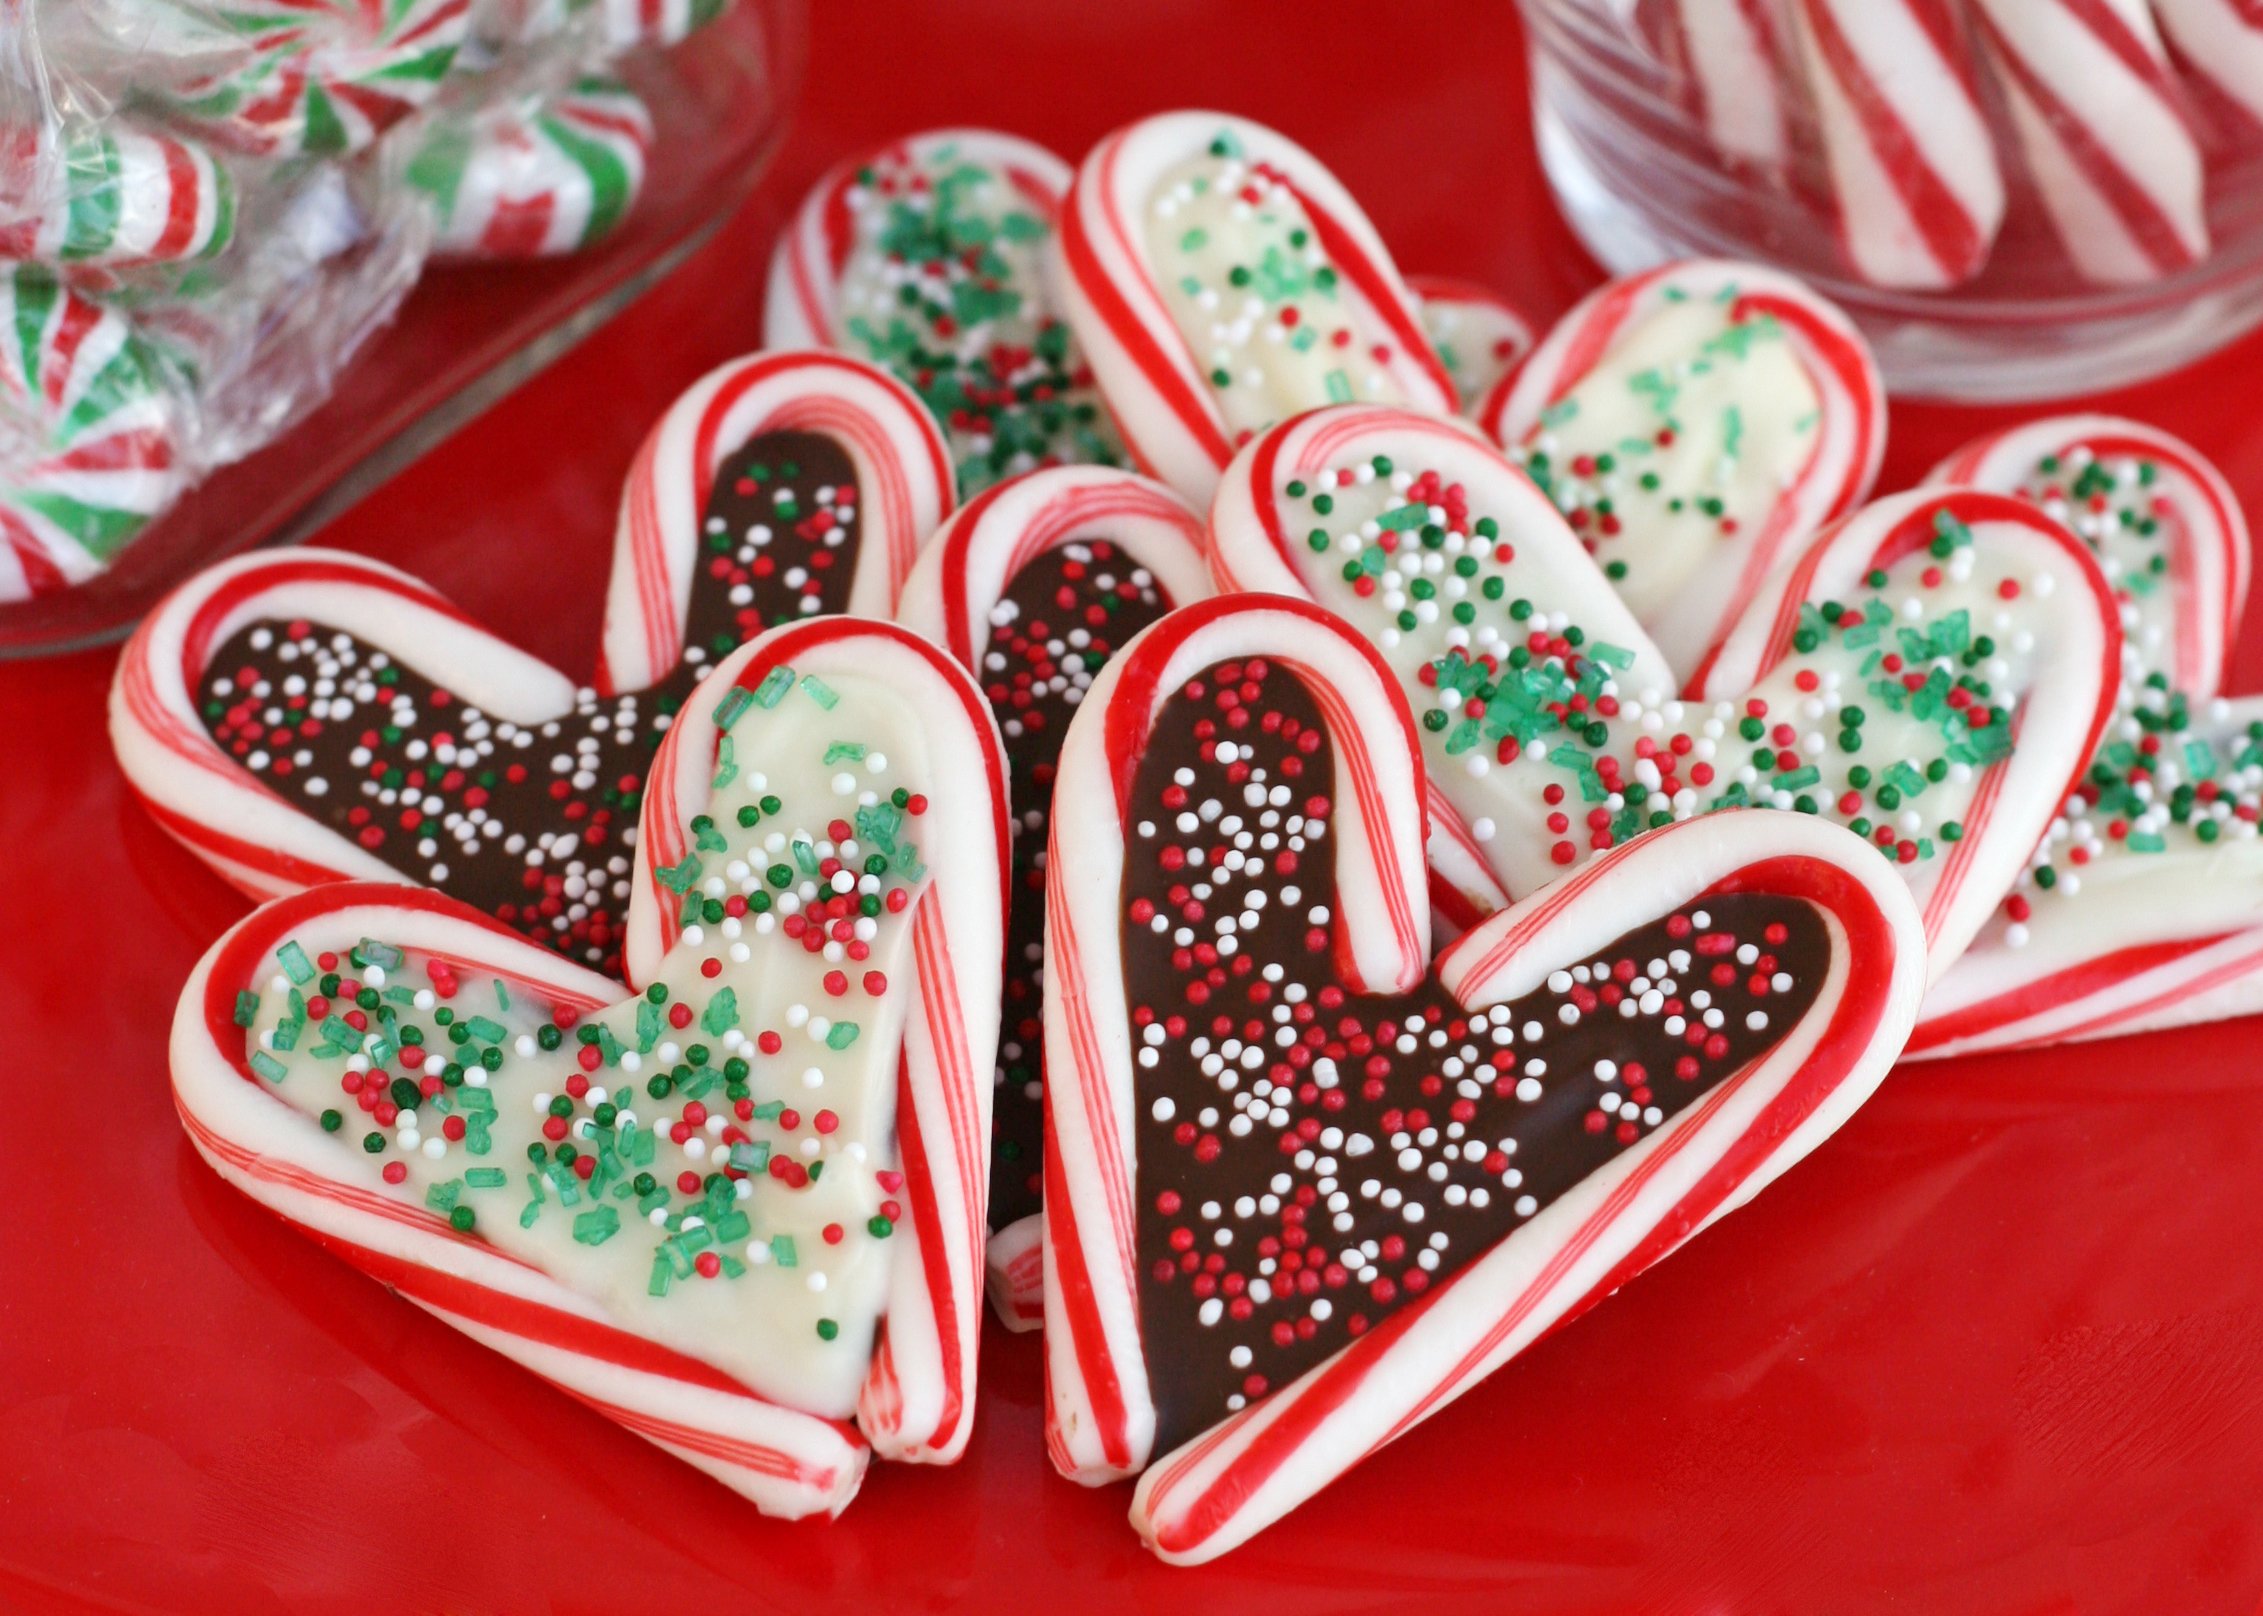 candy cane hearts with chocolate centers and decorated with sprinkles sitting on red surface.